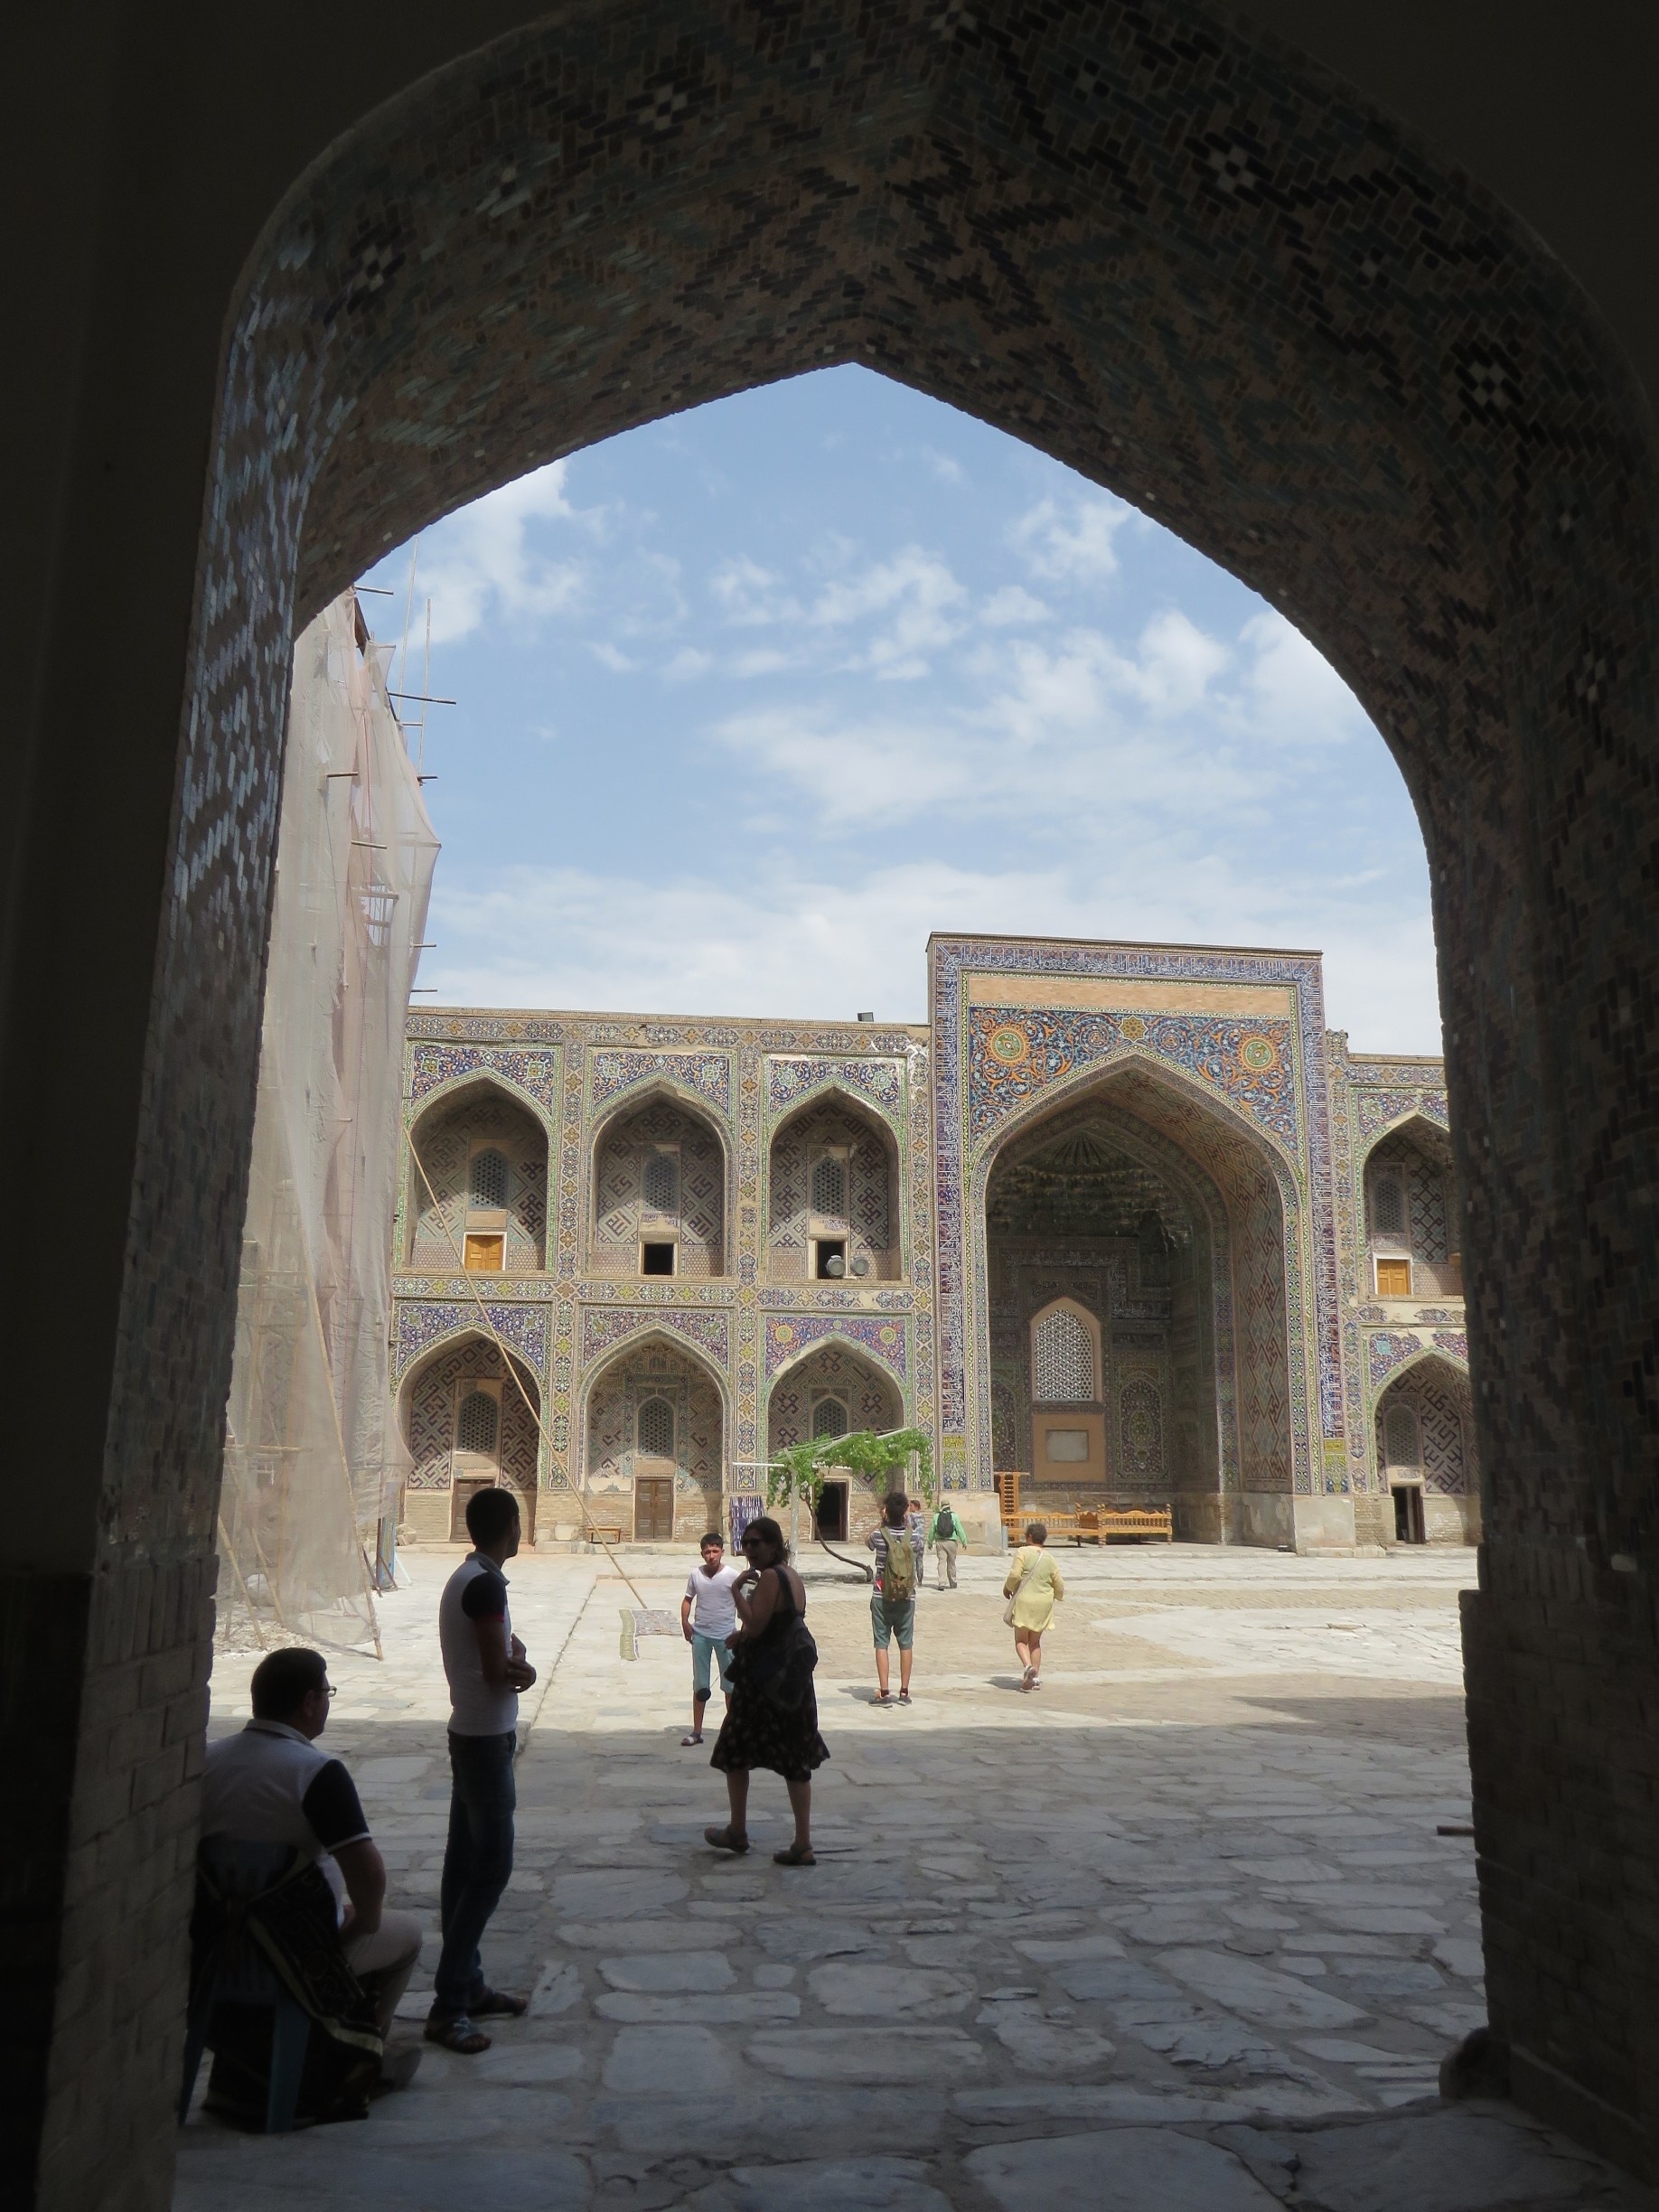 The Bibi-Khanym is also known as the Friday mosque. We were there just after the end of Ramadan when thousands of men would have crammed this space. The space under the arches was cool on such a hot day. 